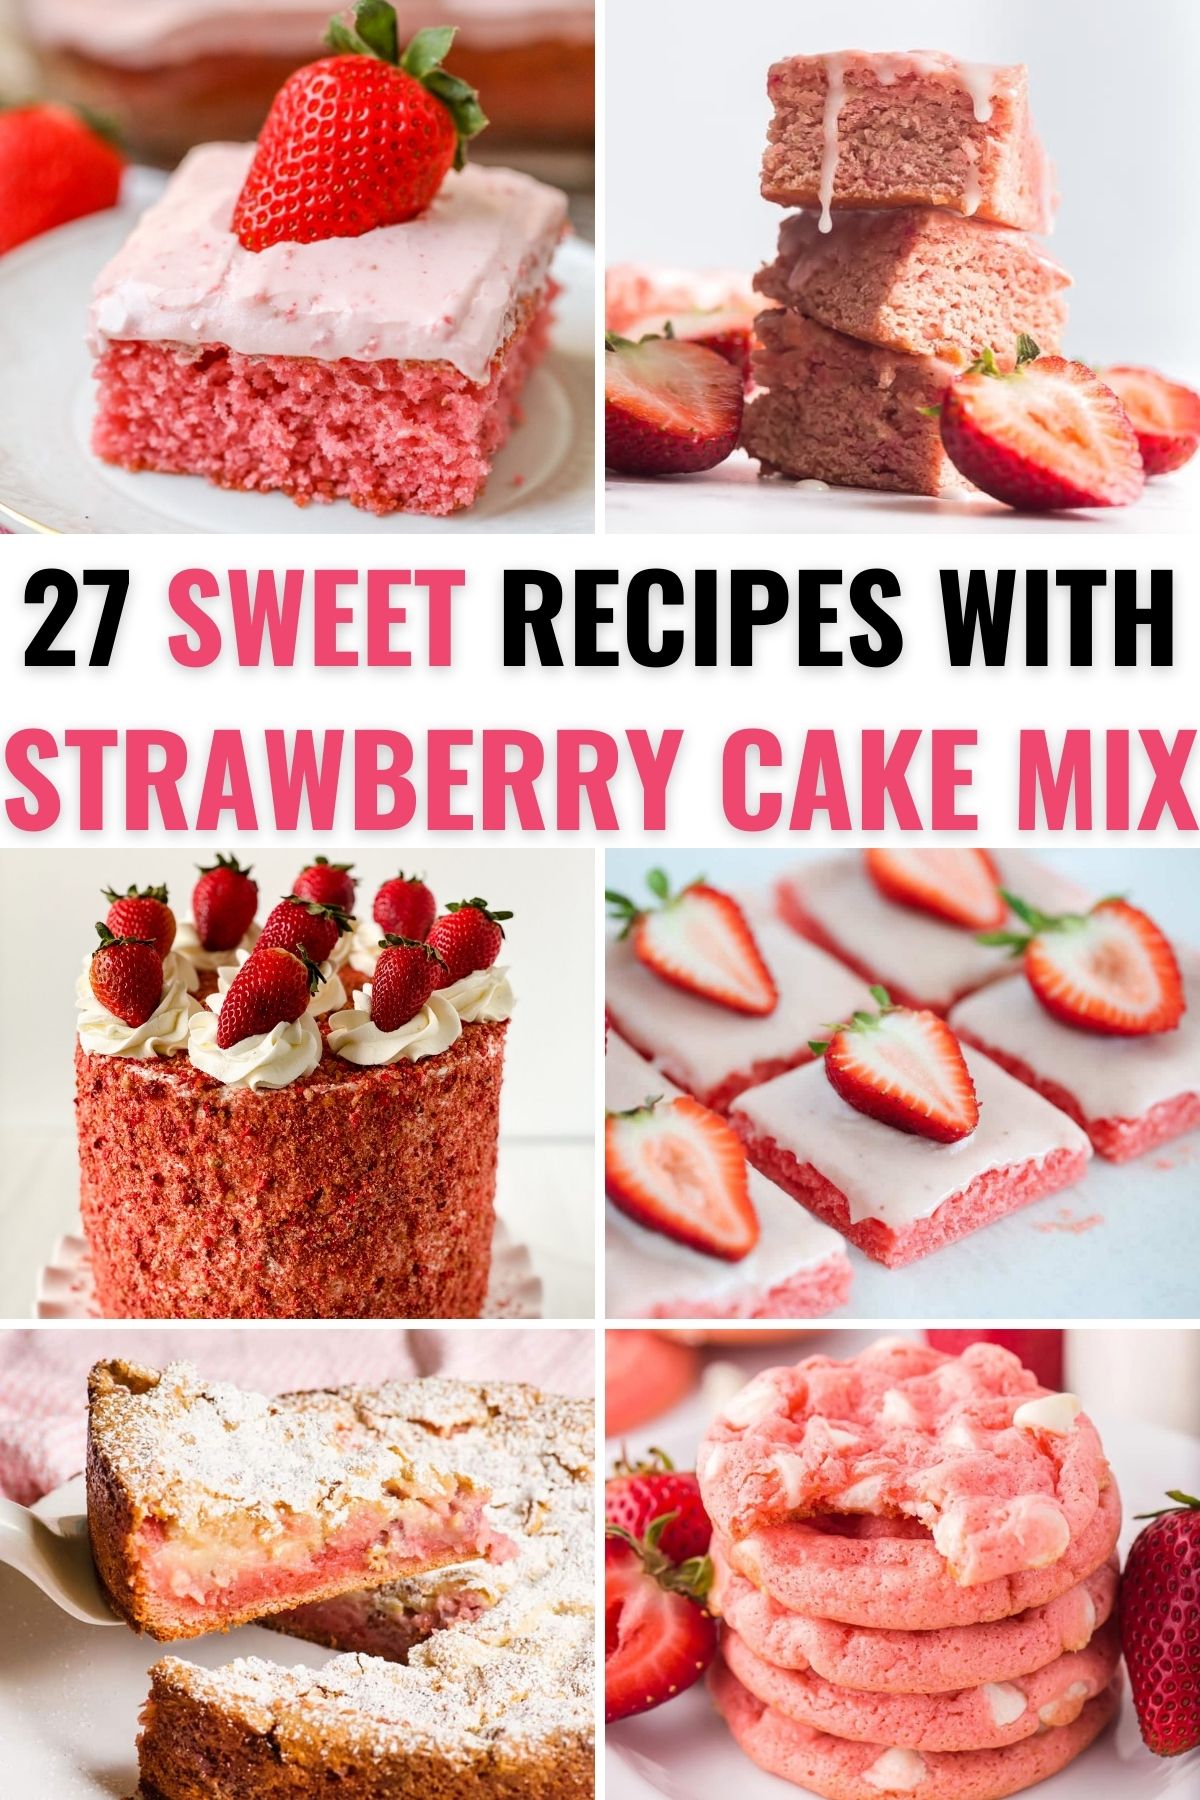 40+ Cake Mix Recipes: Red Velvet Cookies & More - Rich And Delish